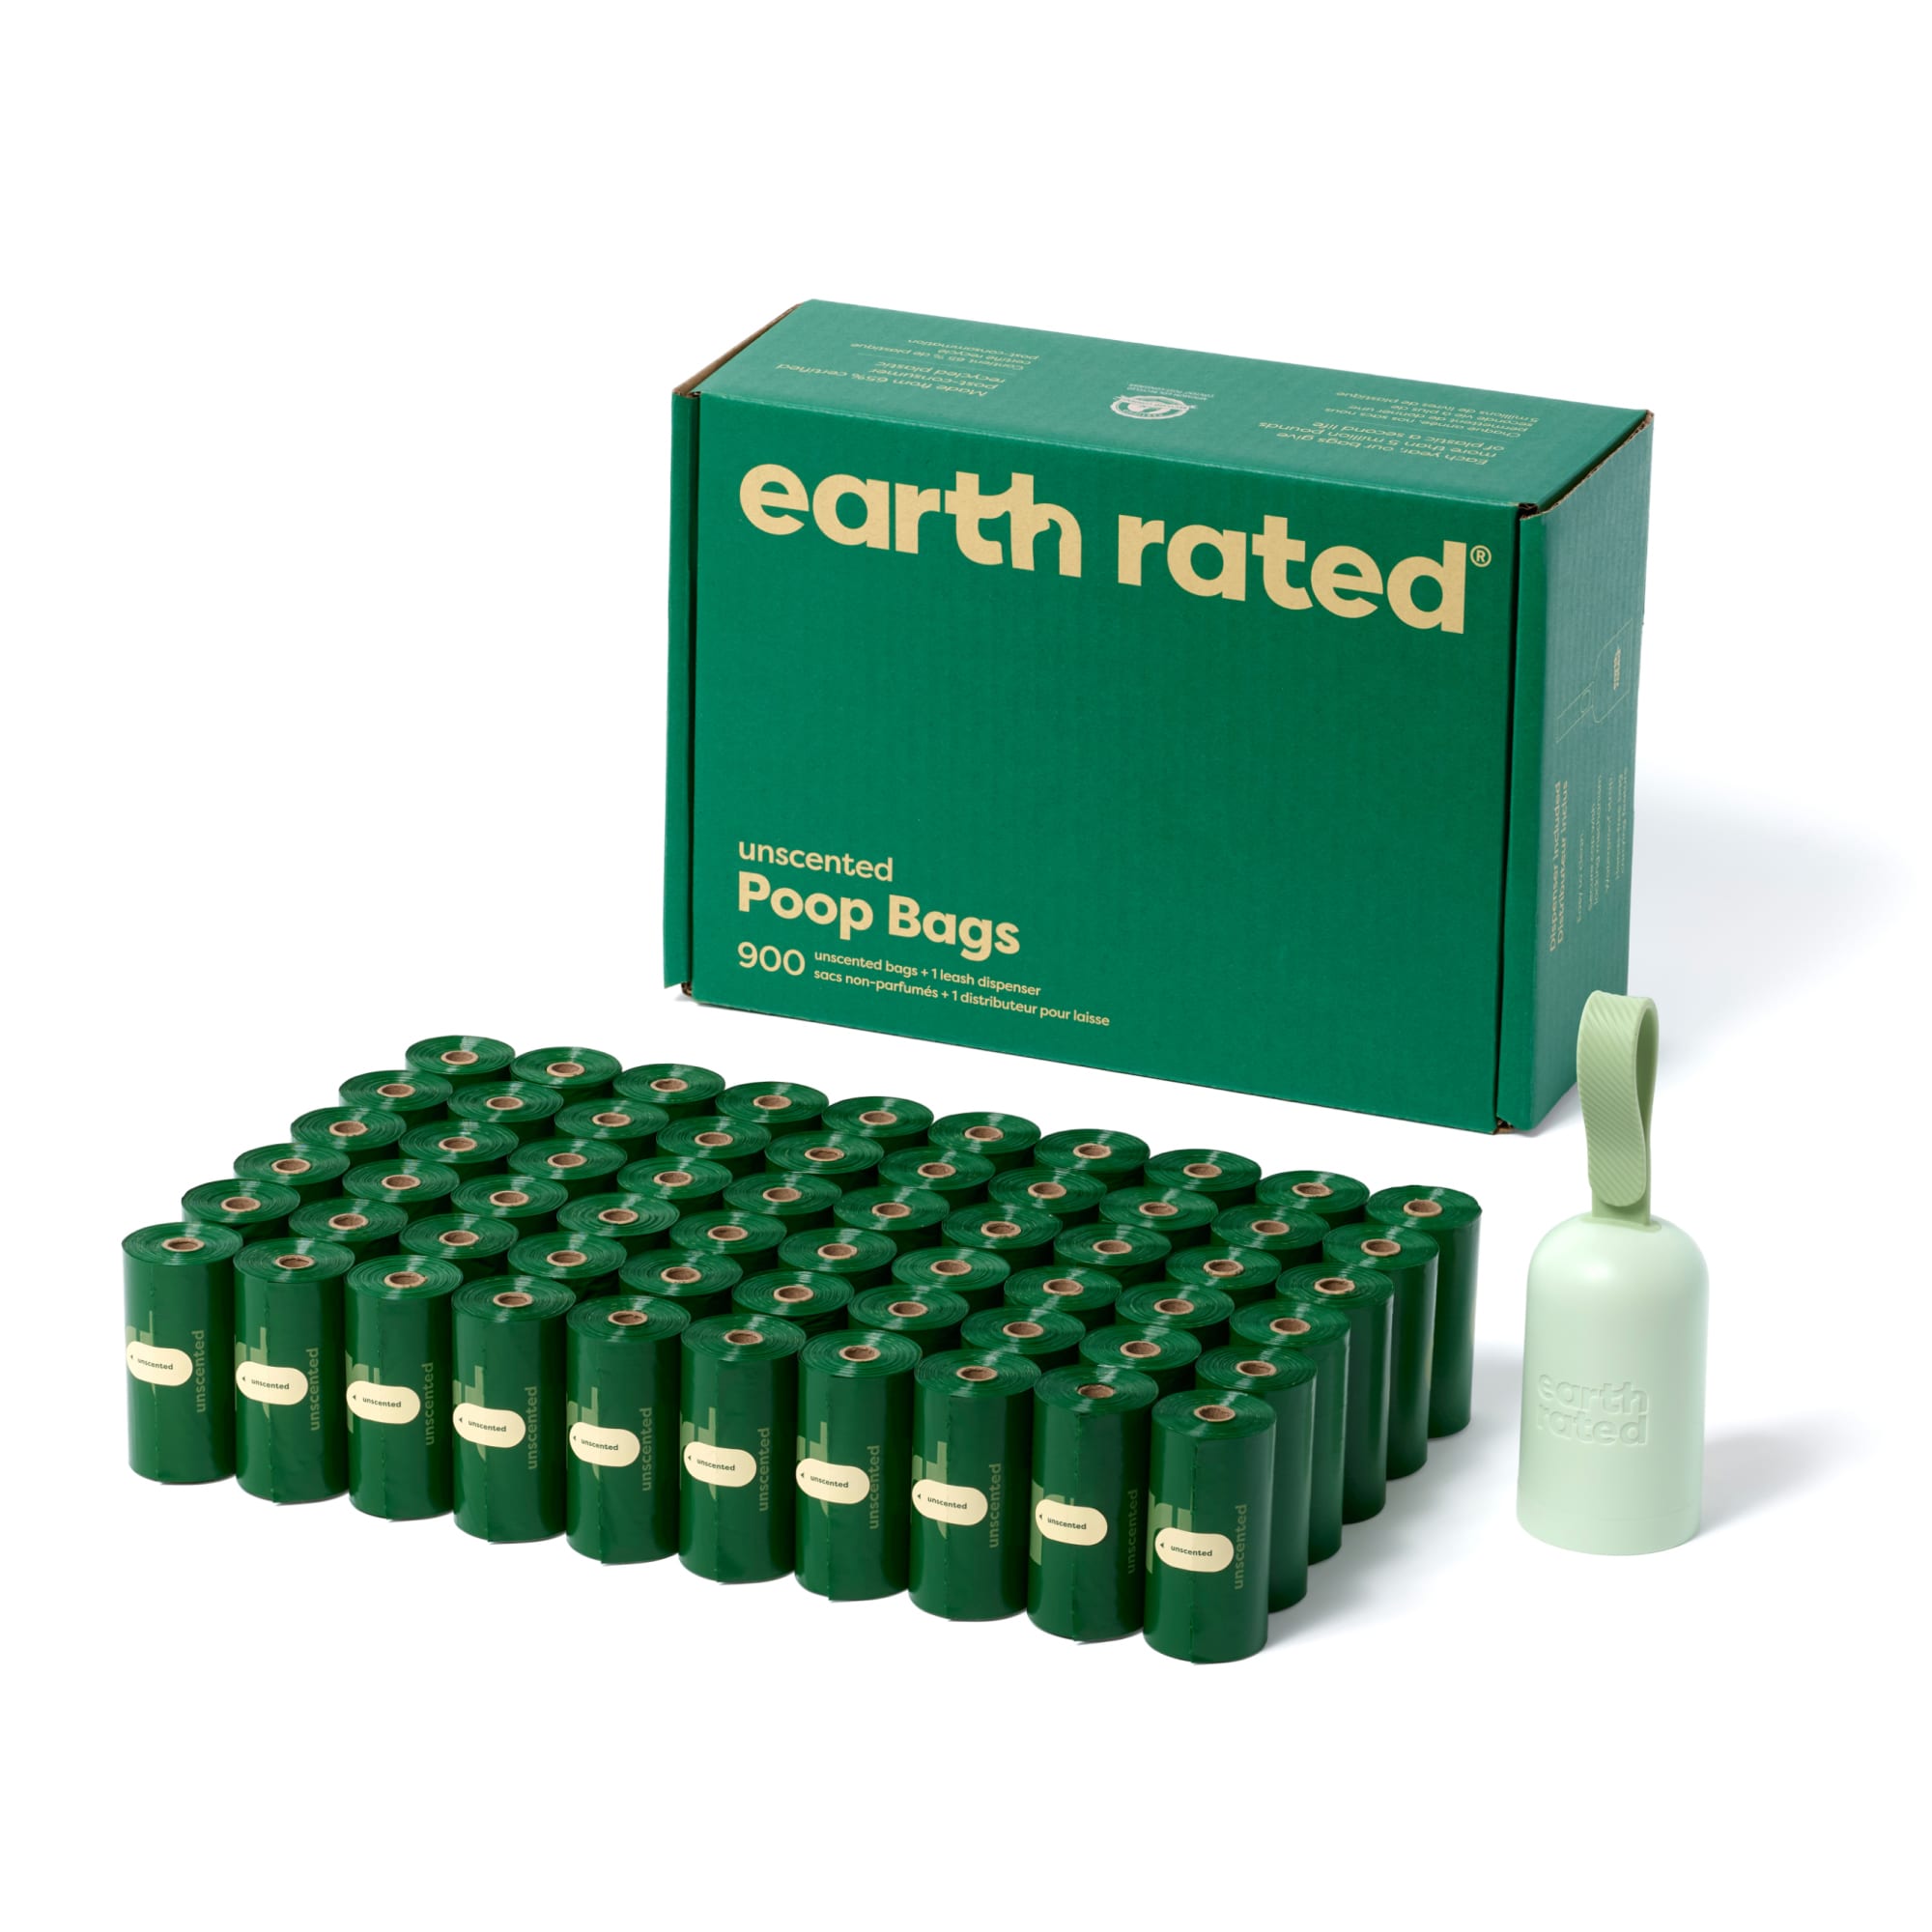 Earth Rated Dog Poop Bags Unscented Bags + 2 Dispensers